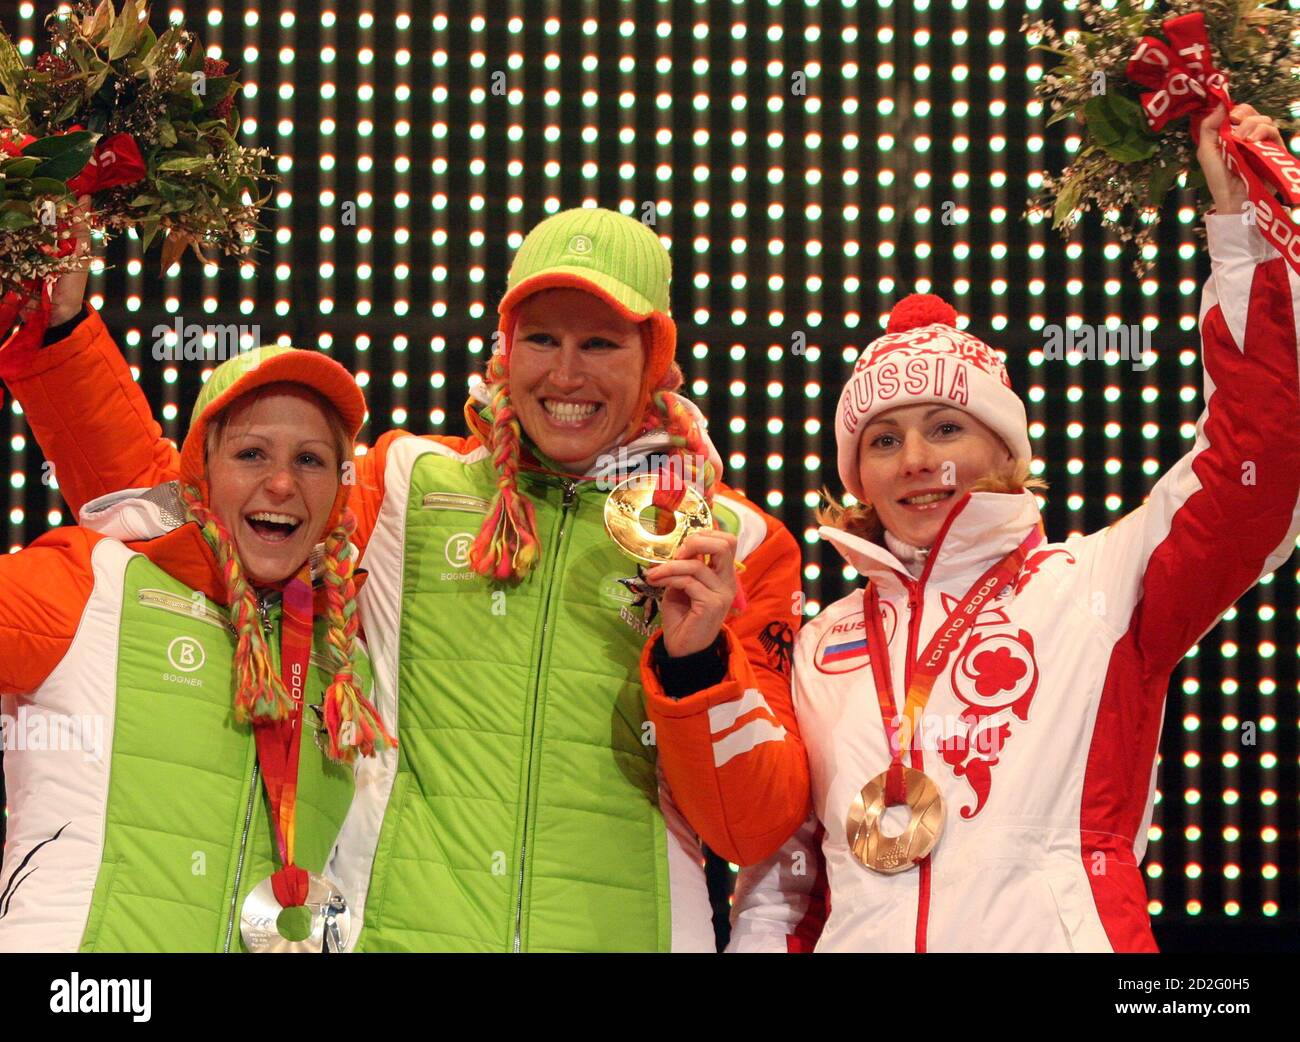 Gold medallist Kati Wilhelm (C) of Germany, silver medallist Martina Glagow  (L) of Germany and bronze medallist Albina Akhatova of Russia celebrate  after receiving their medals for the biathlon women's 10 km